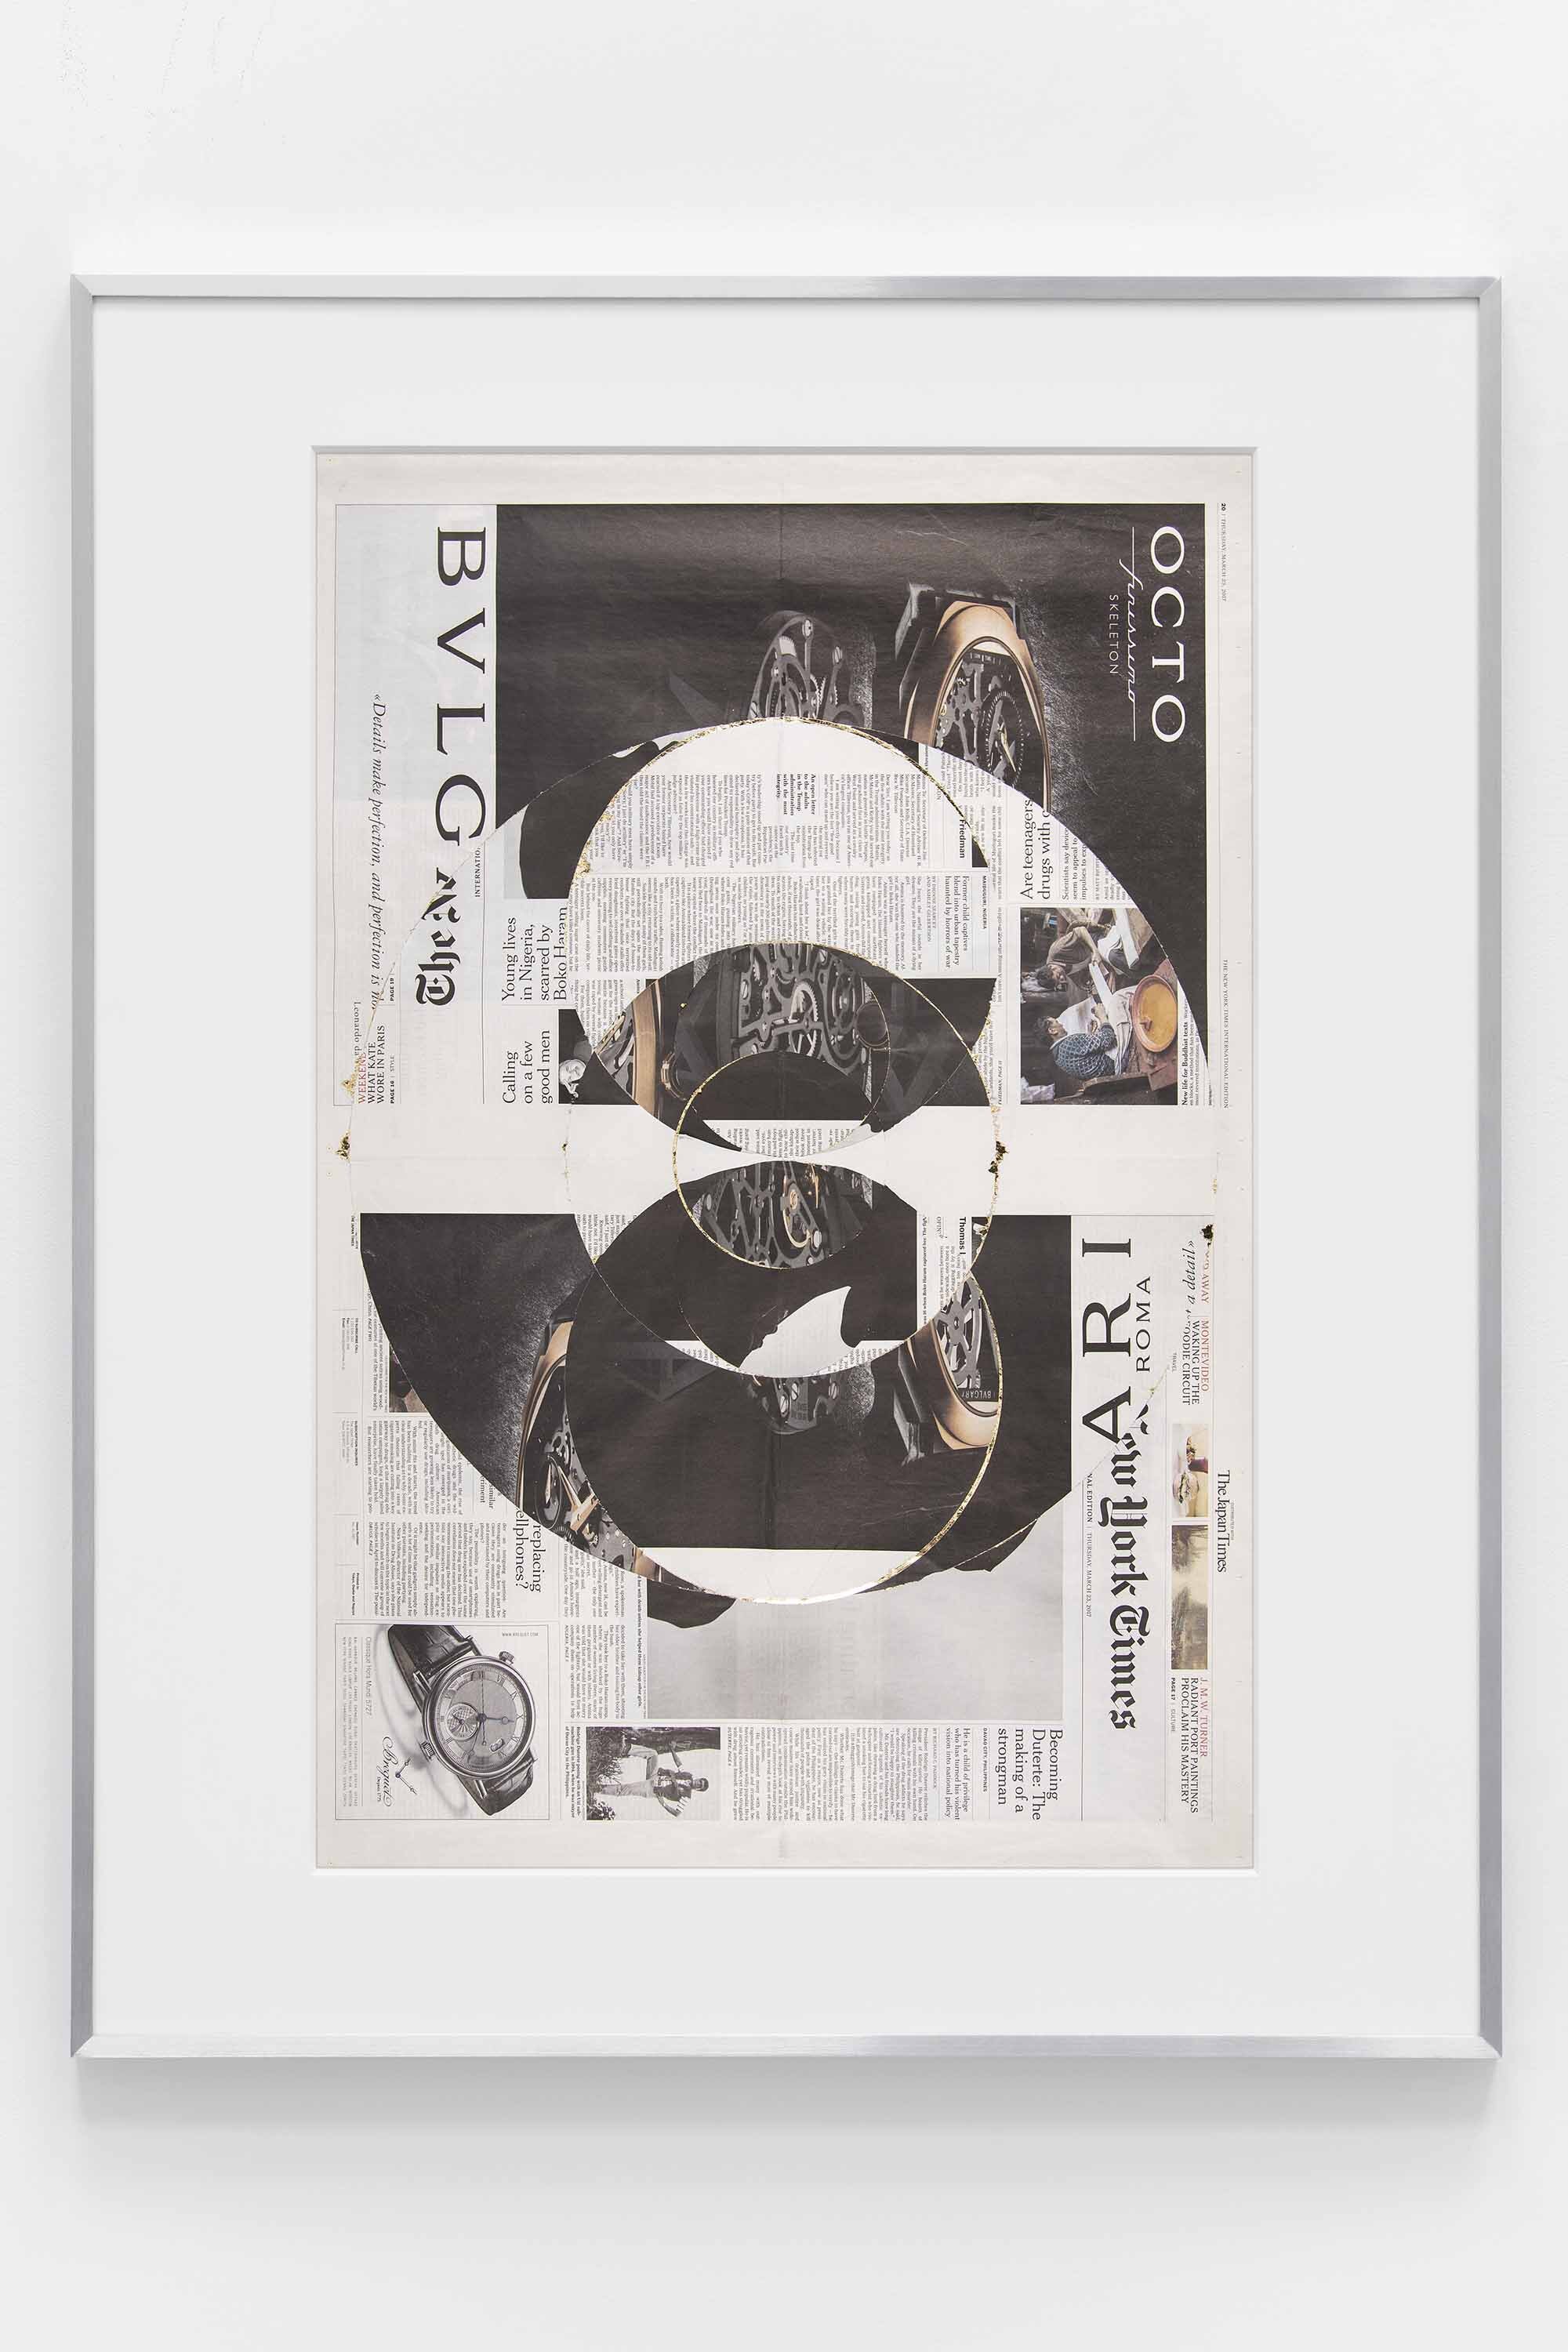   Blind Collage (Seven 180º Rotations, The New York Times International Edition, Distributed with The Japan Times: Tokyo, Japan, Thursday, March 23, 2017)   2021  Newspaper, tape, and 22 karat gold leaf  39 1/8 x 31 1/4 inches   Blind Collages, 2017–